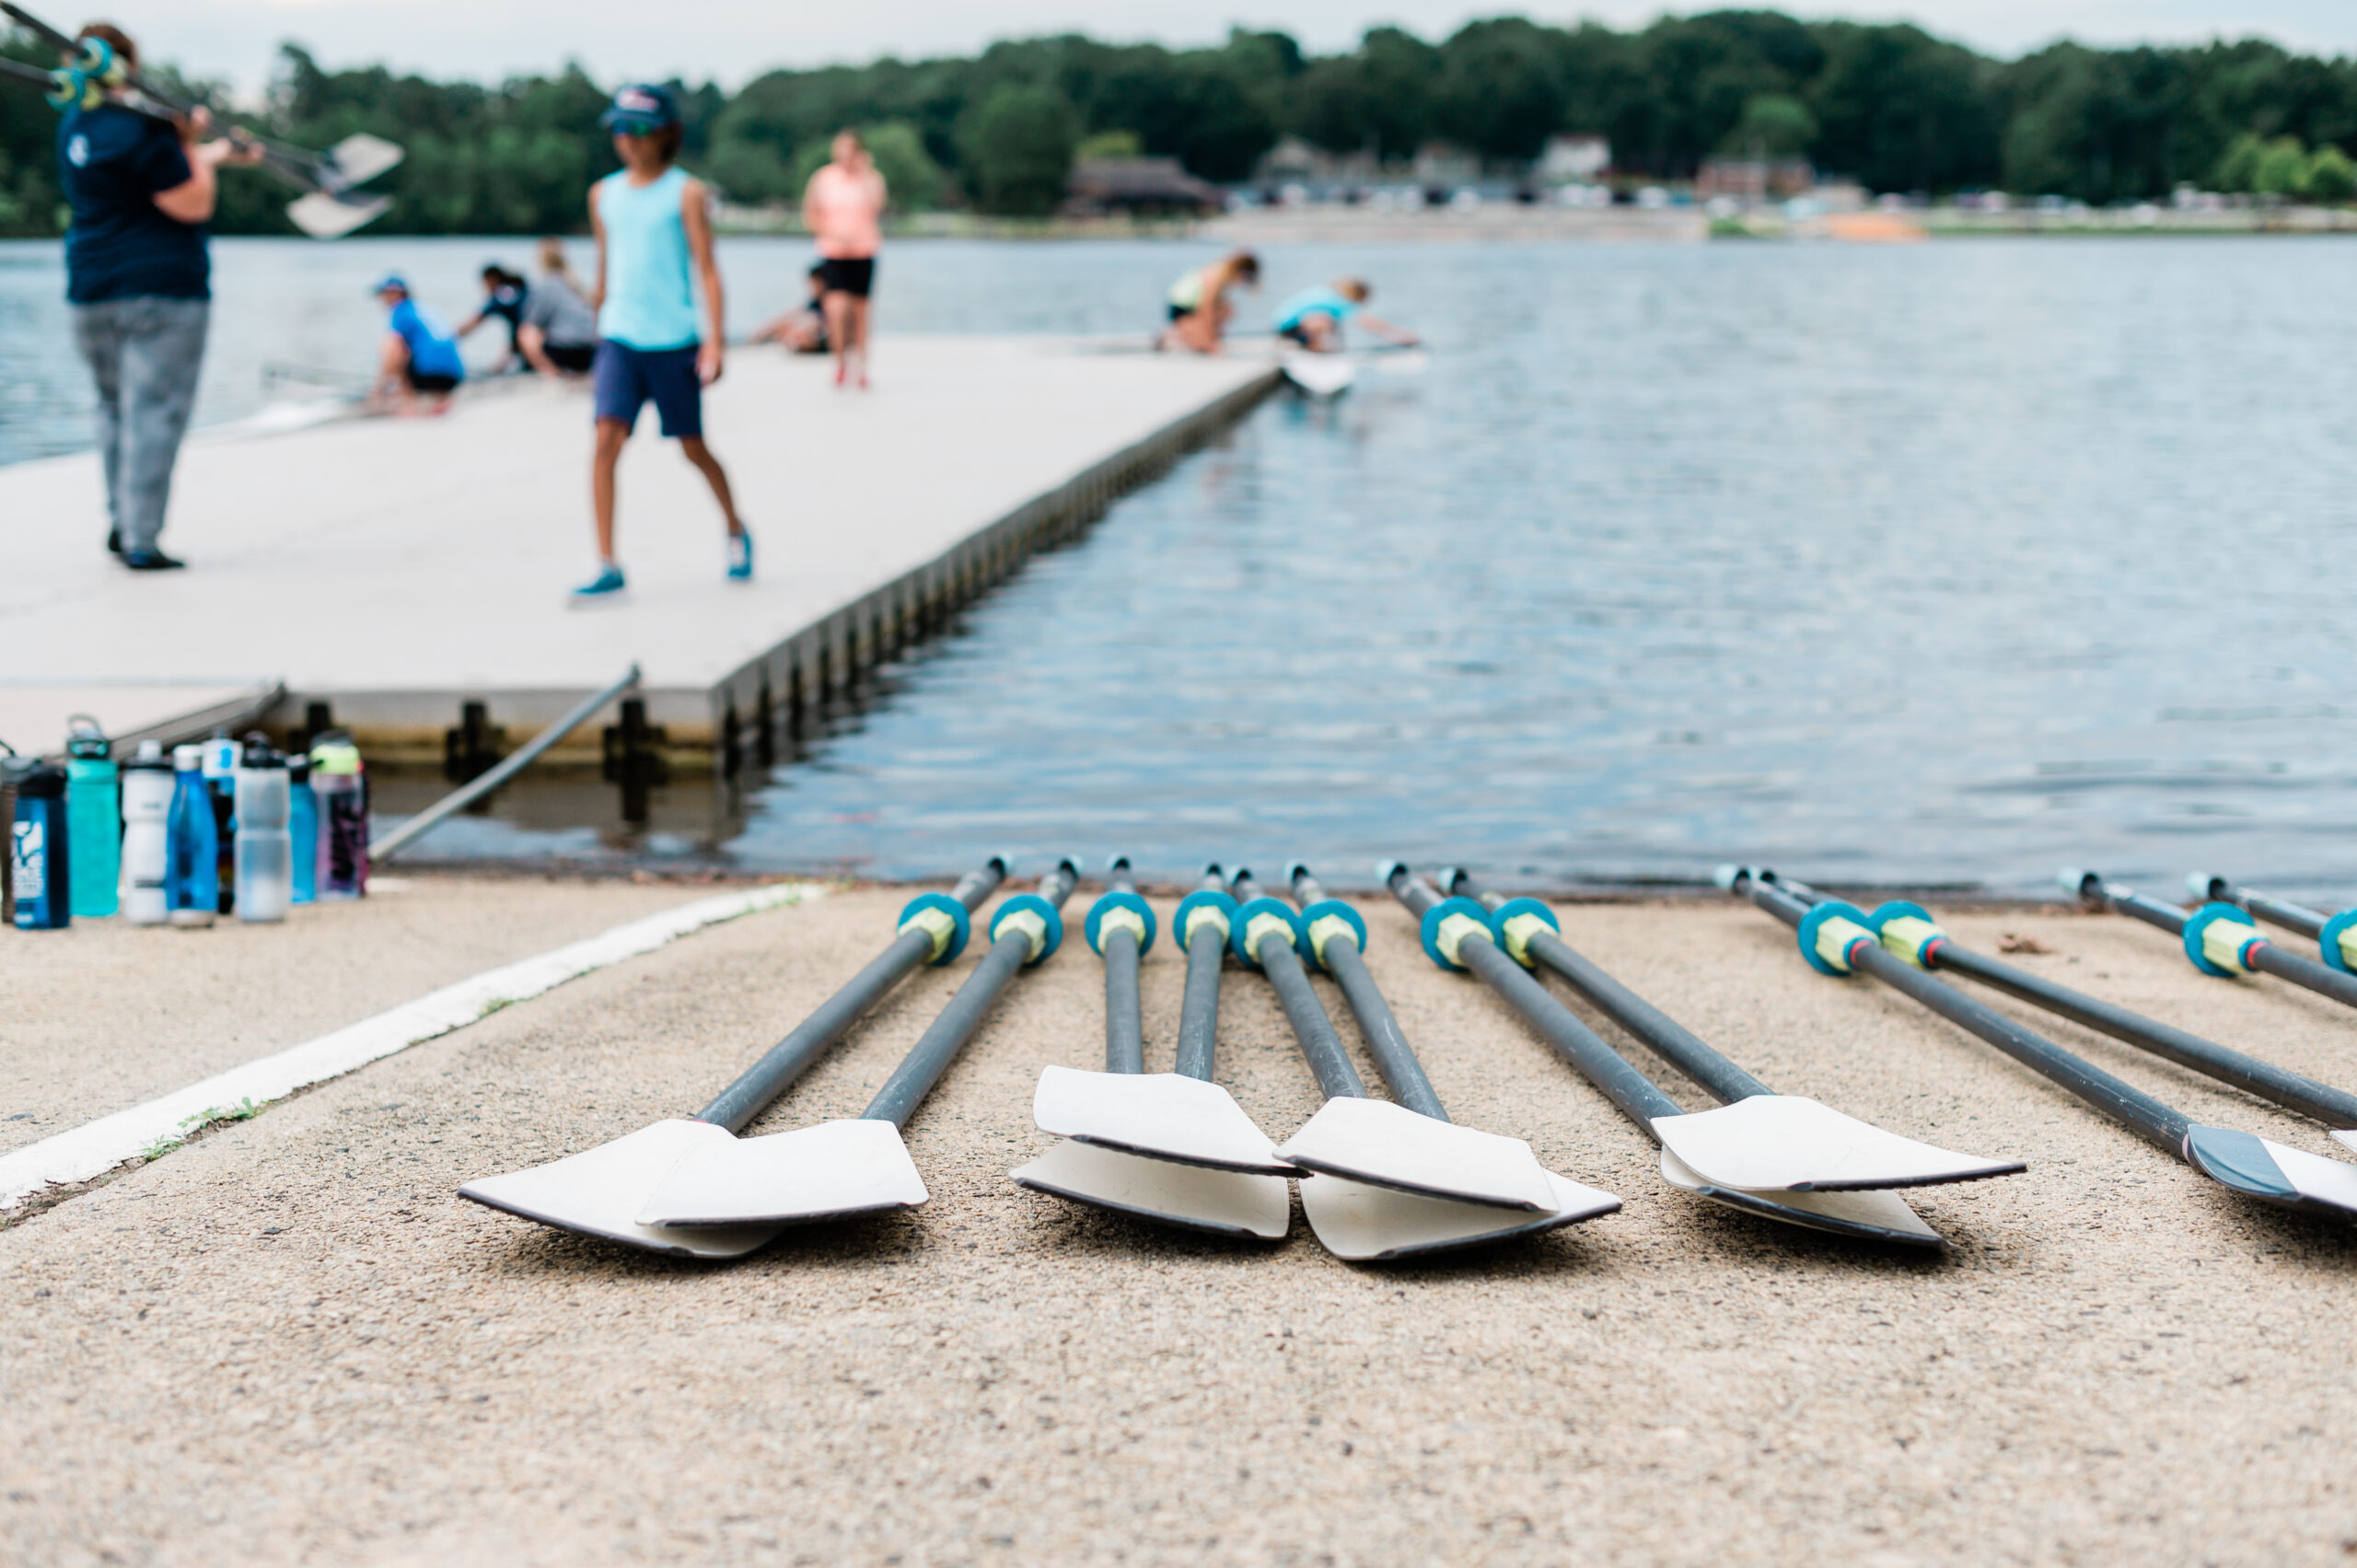 Oars sit on the dock next to the boats at Oak Hollow Lake in High Point, NC.